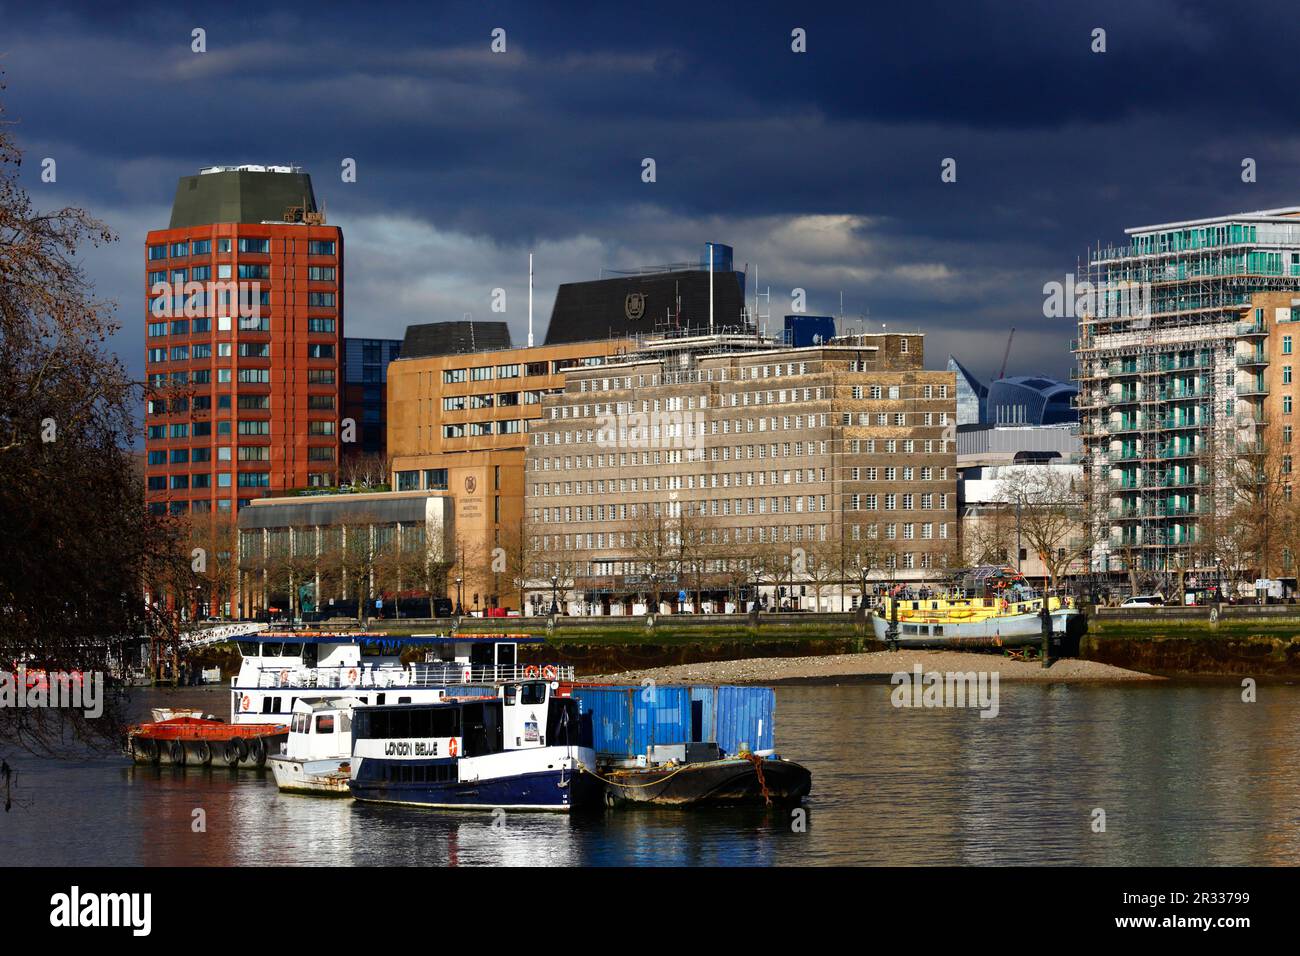 River Thames, Westminster Tower (L) and International Maritime Organization offices (centre) under a stormy sky, London Belle party boat in foreground Stock Photo